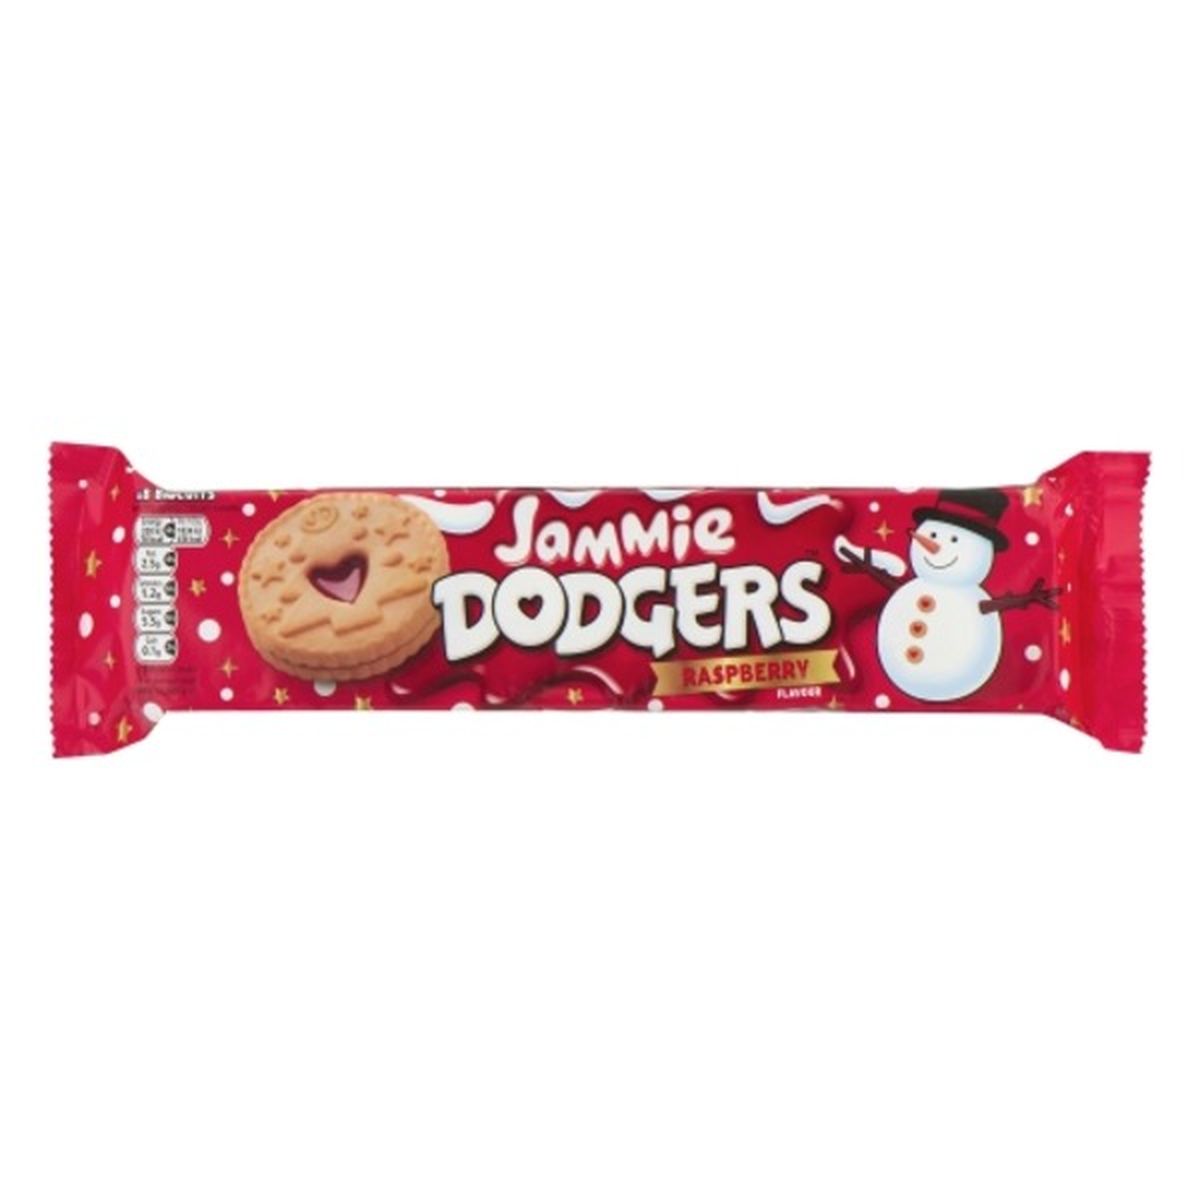 Calories in Jammie Dodgers Biscuits, Raspberry Flavour